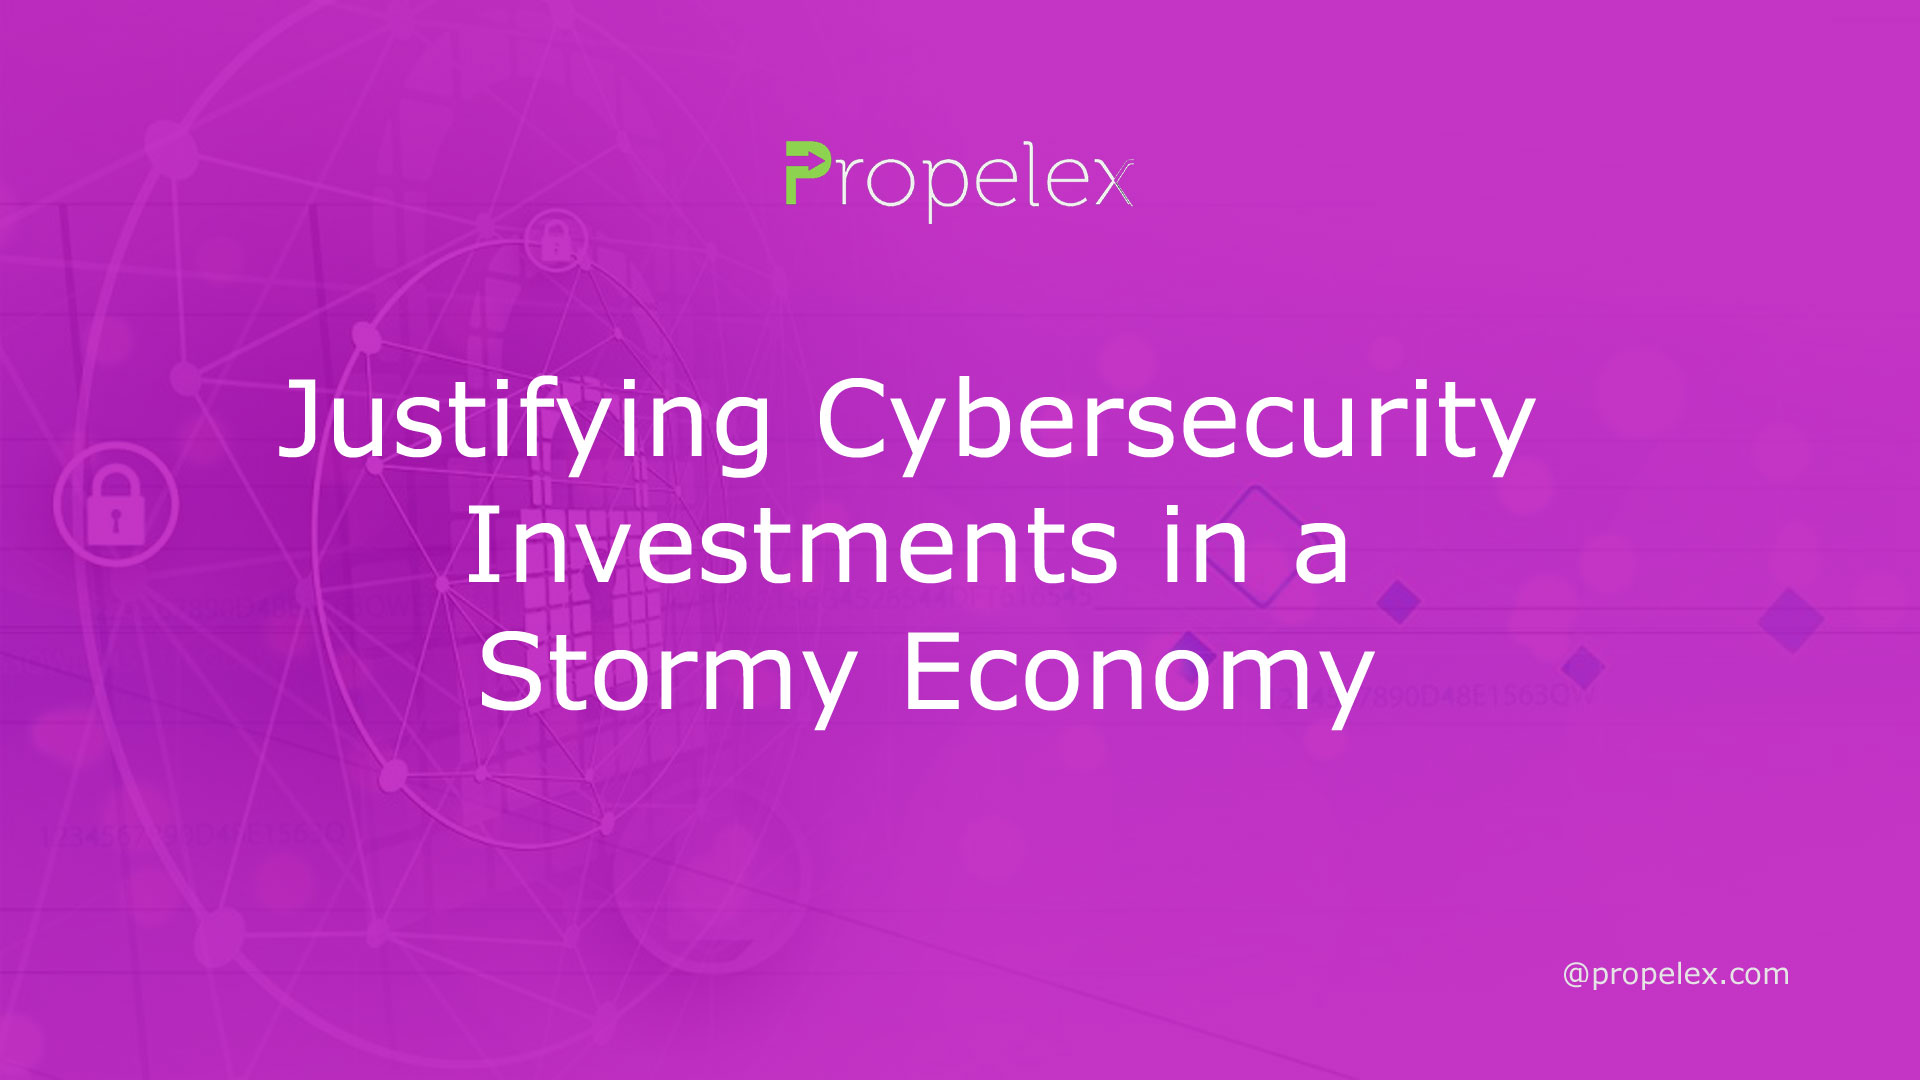 Justifying Cybersecurity Investments in a Stormy Economy